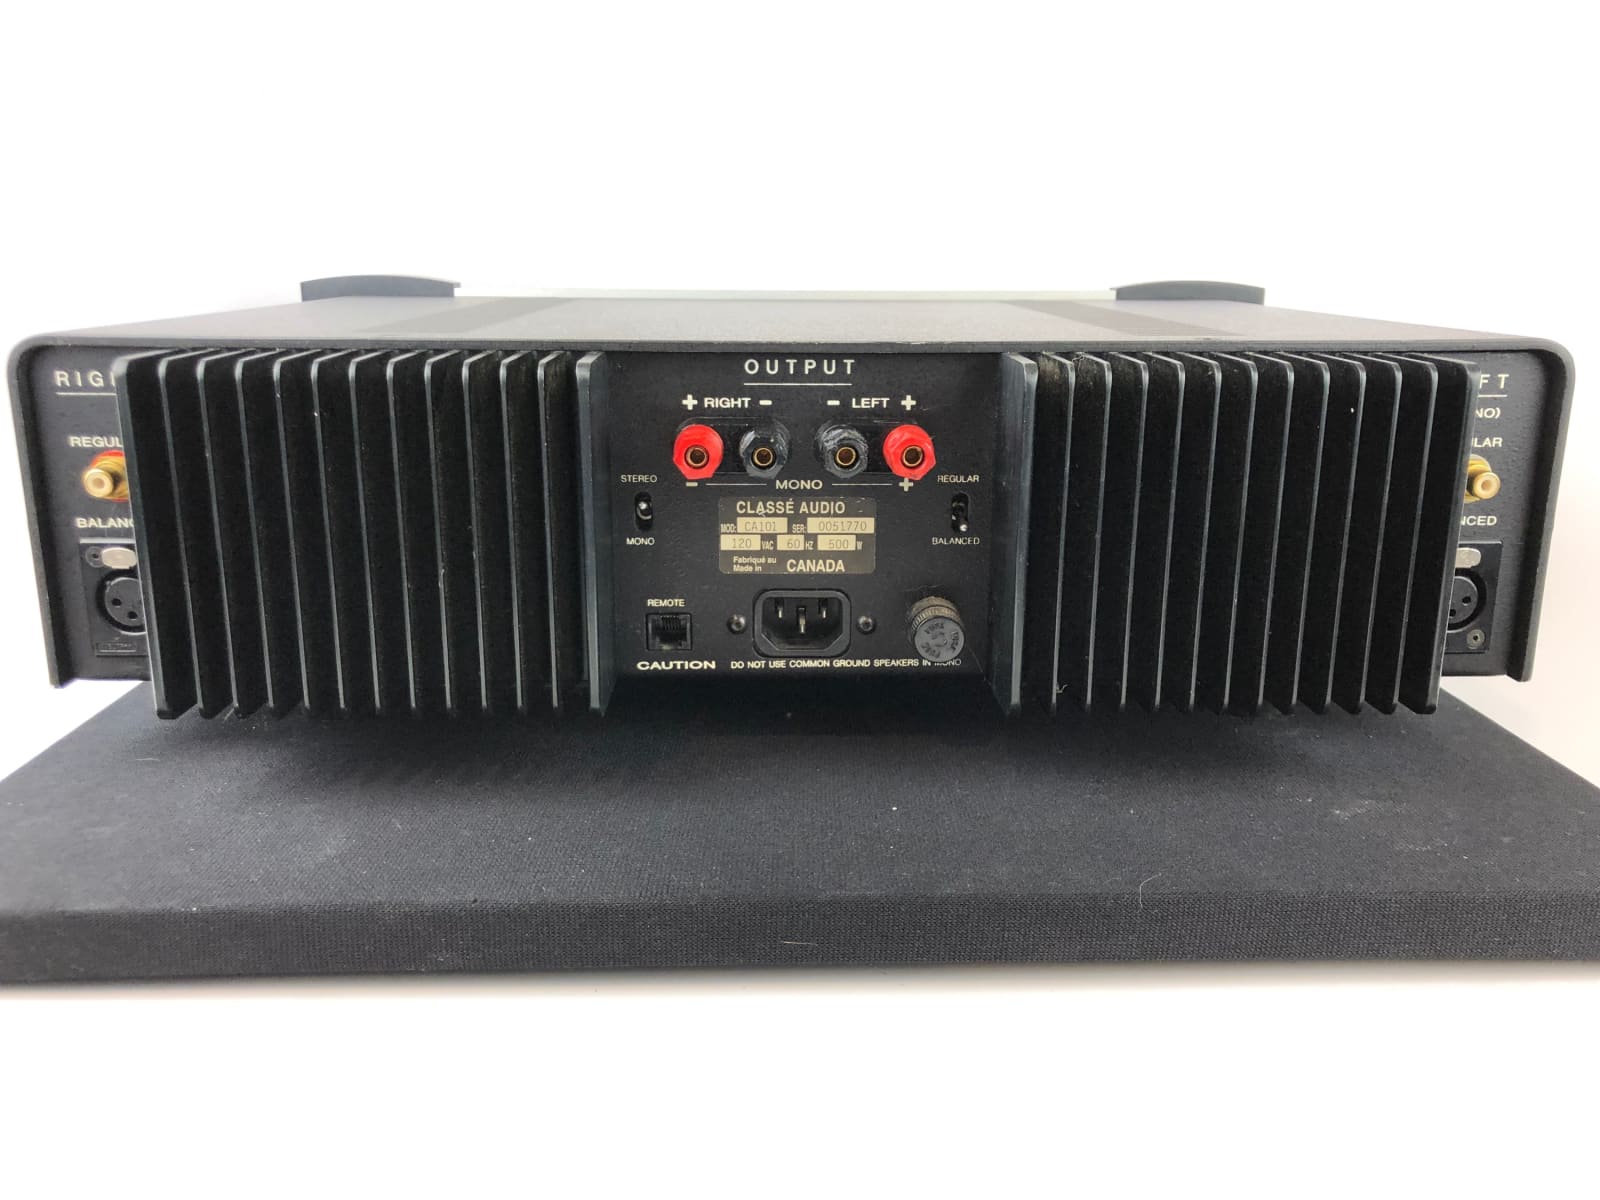 Classe Audio Ca-101 Solid State Amplifier In Two Tone Finish - Fully Tested (D)